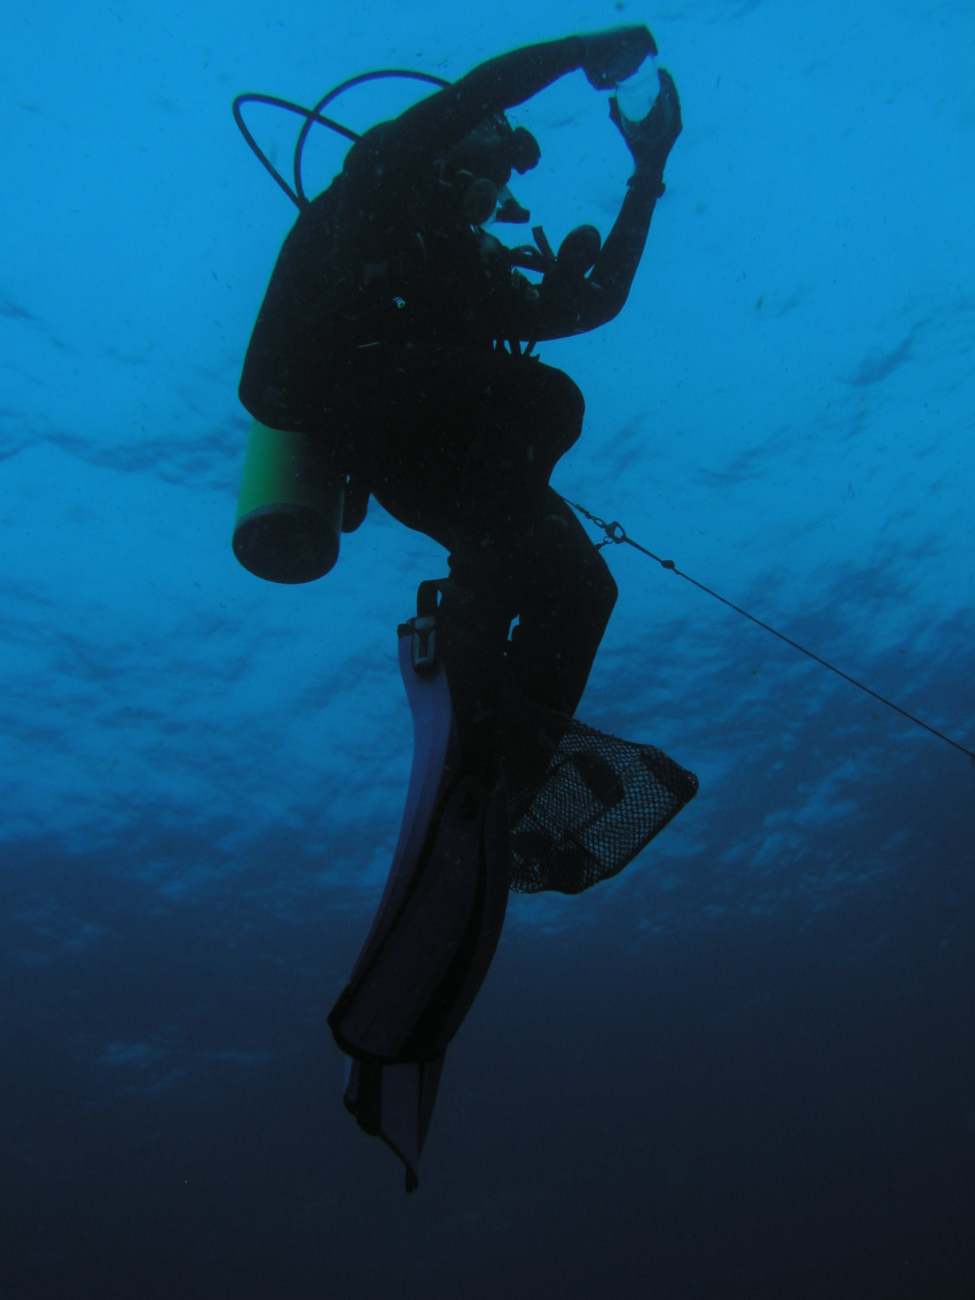 Tethered diver in blue water dive observing fauna in the water column